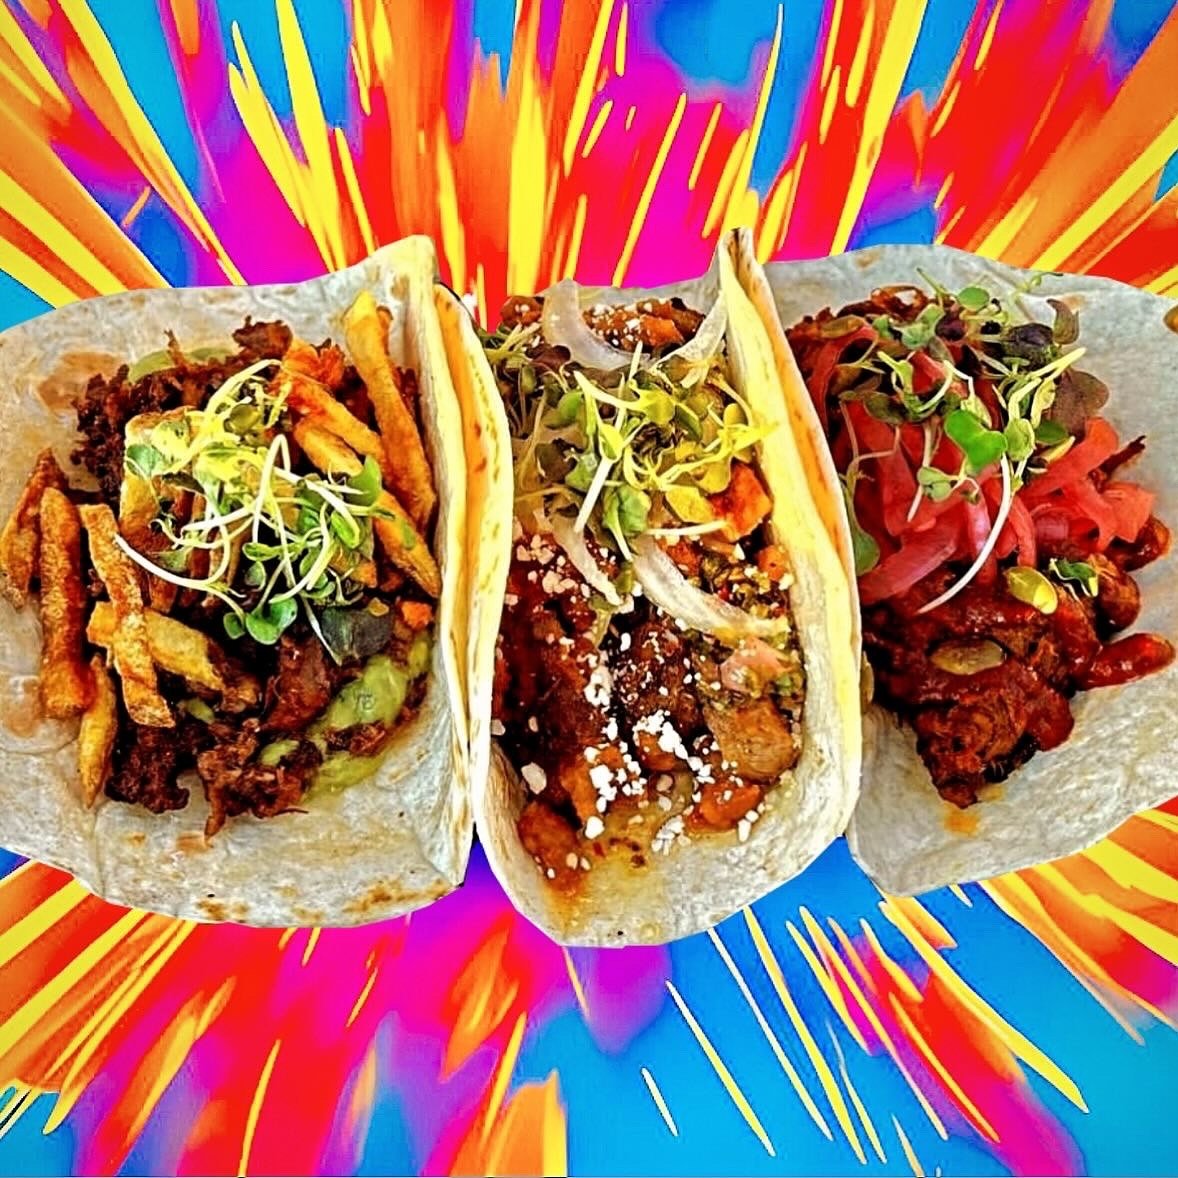 Which is your favorite out of our top 3? 
(Left) Fuego Saudero (middle) El Borracho (right) BarbaChaos!